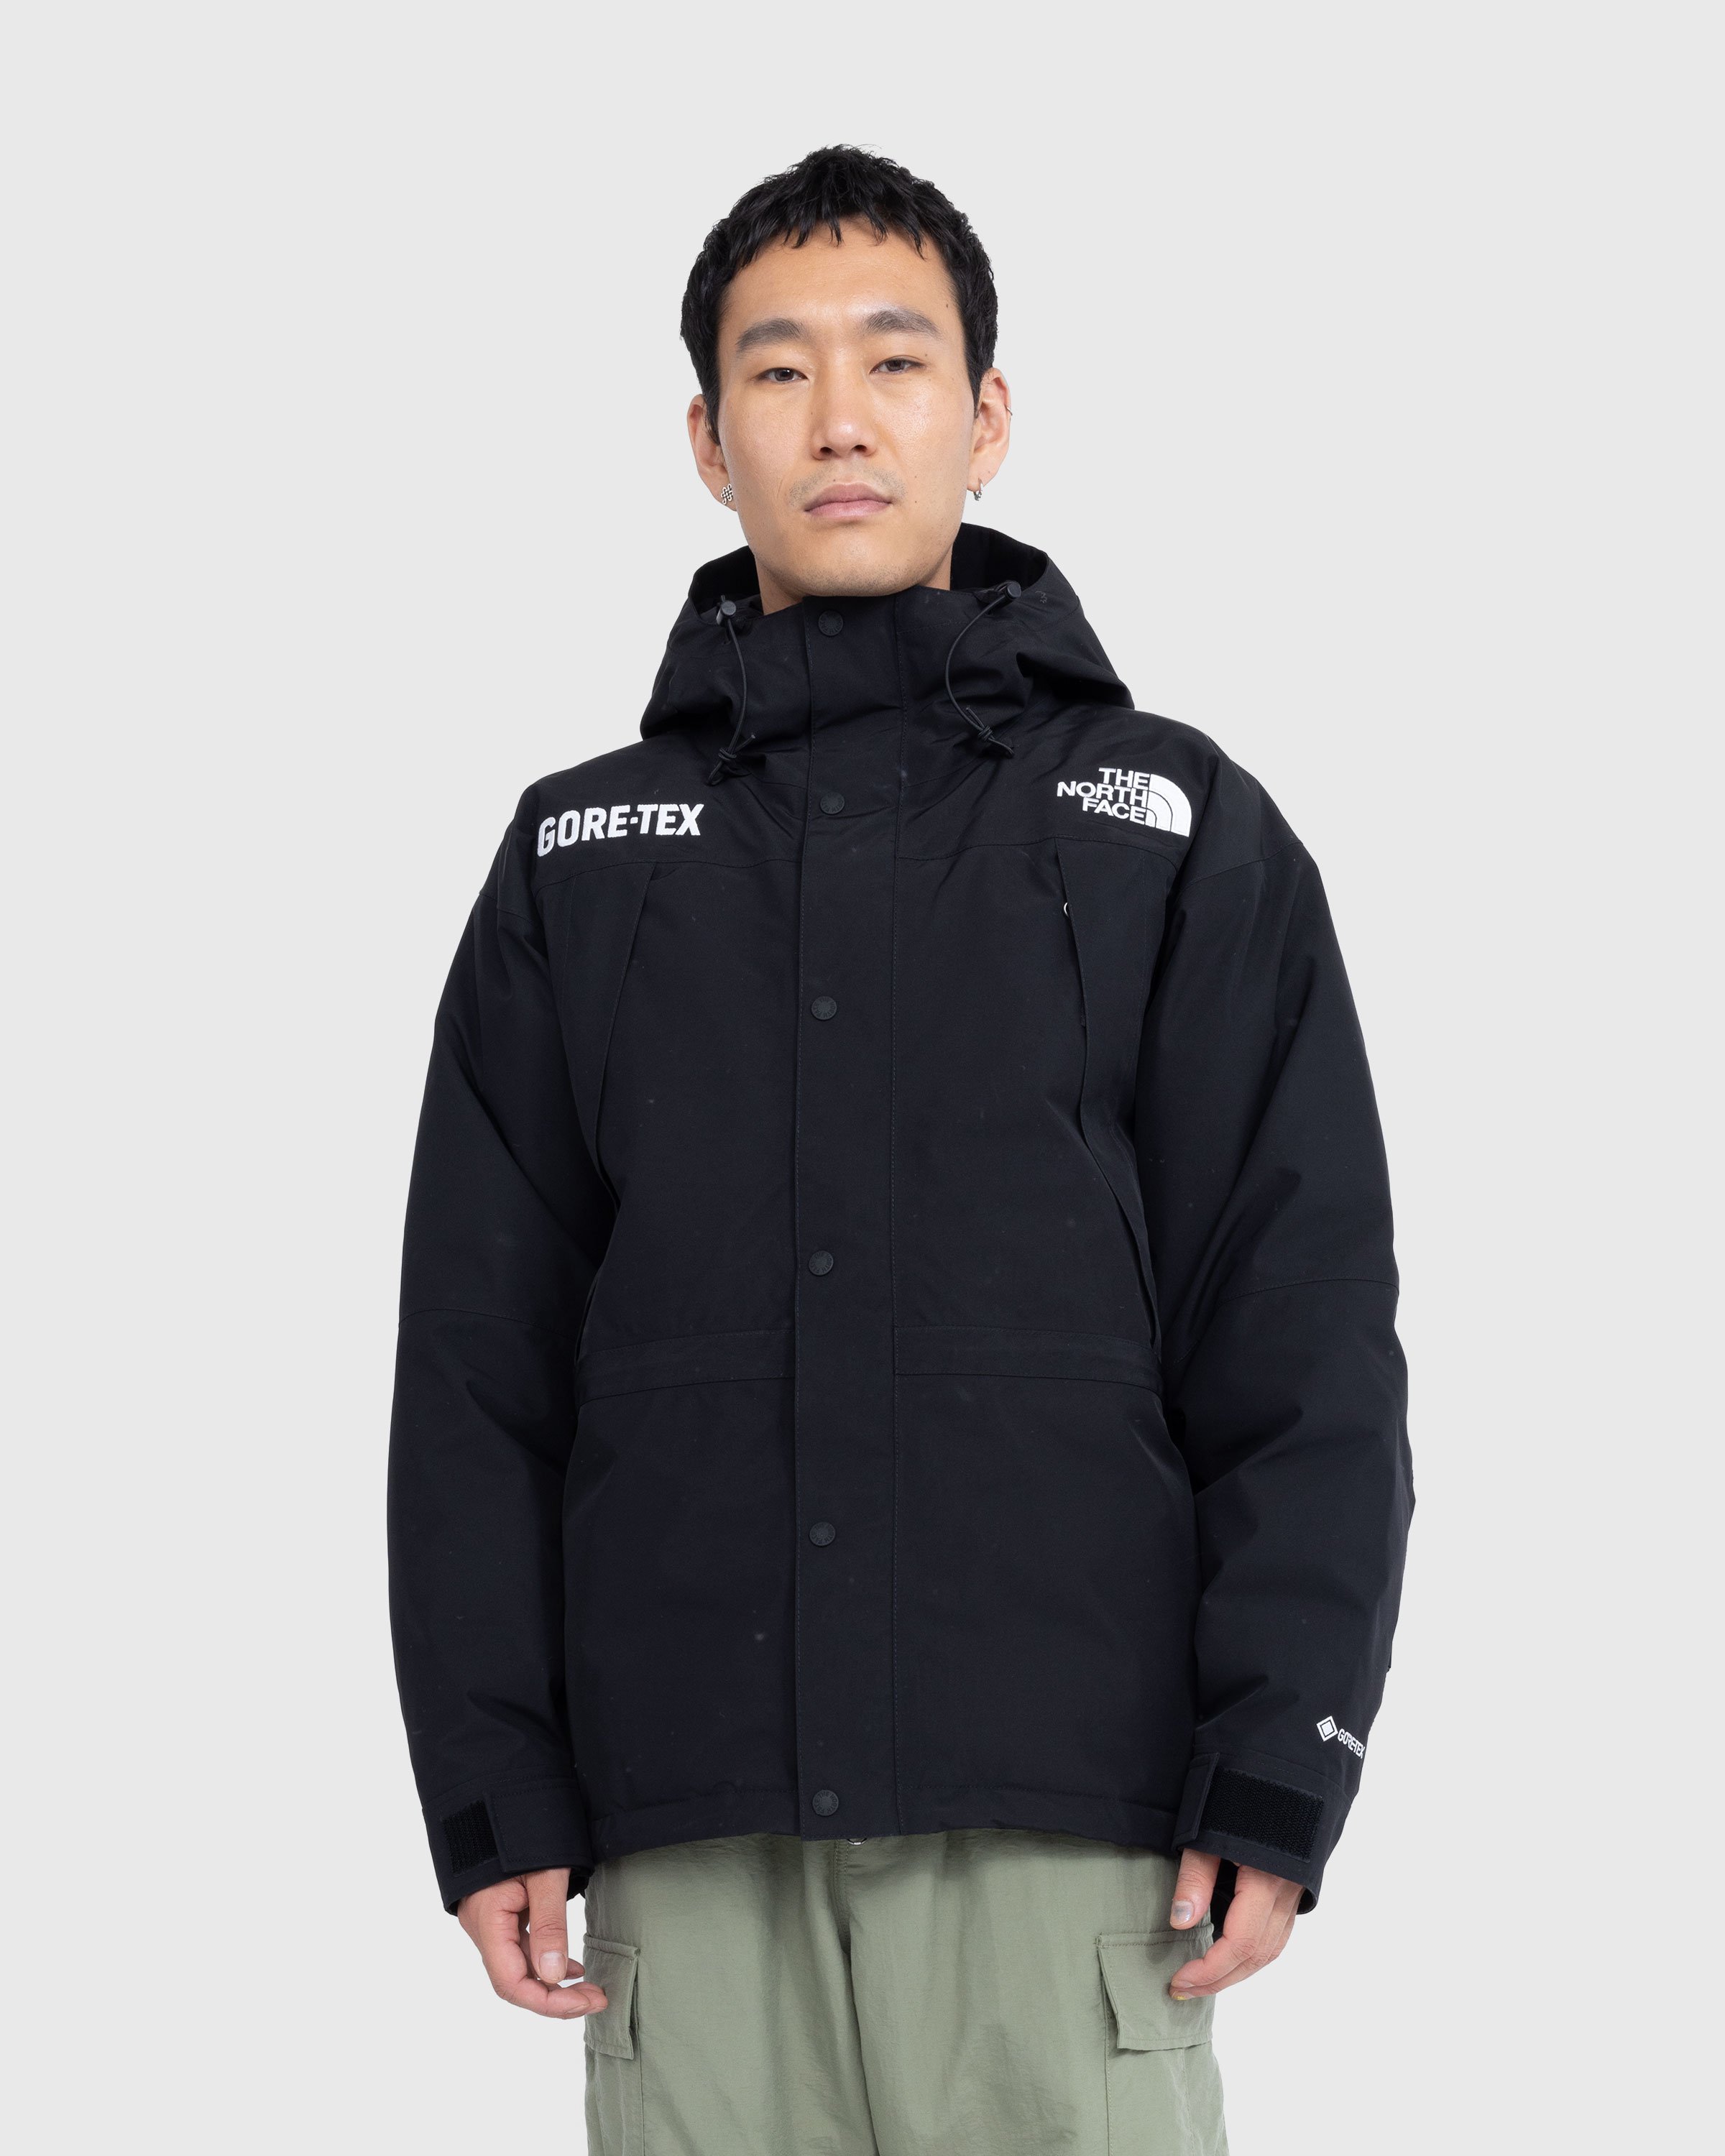 The North Face - GORE-TEX Mountain Guide Insulated Jacket Black - Clothing - Black - Image 2